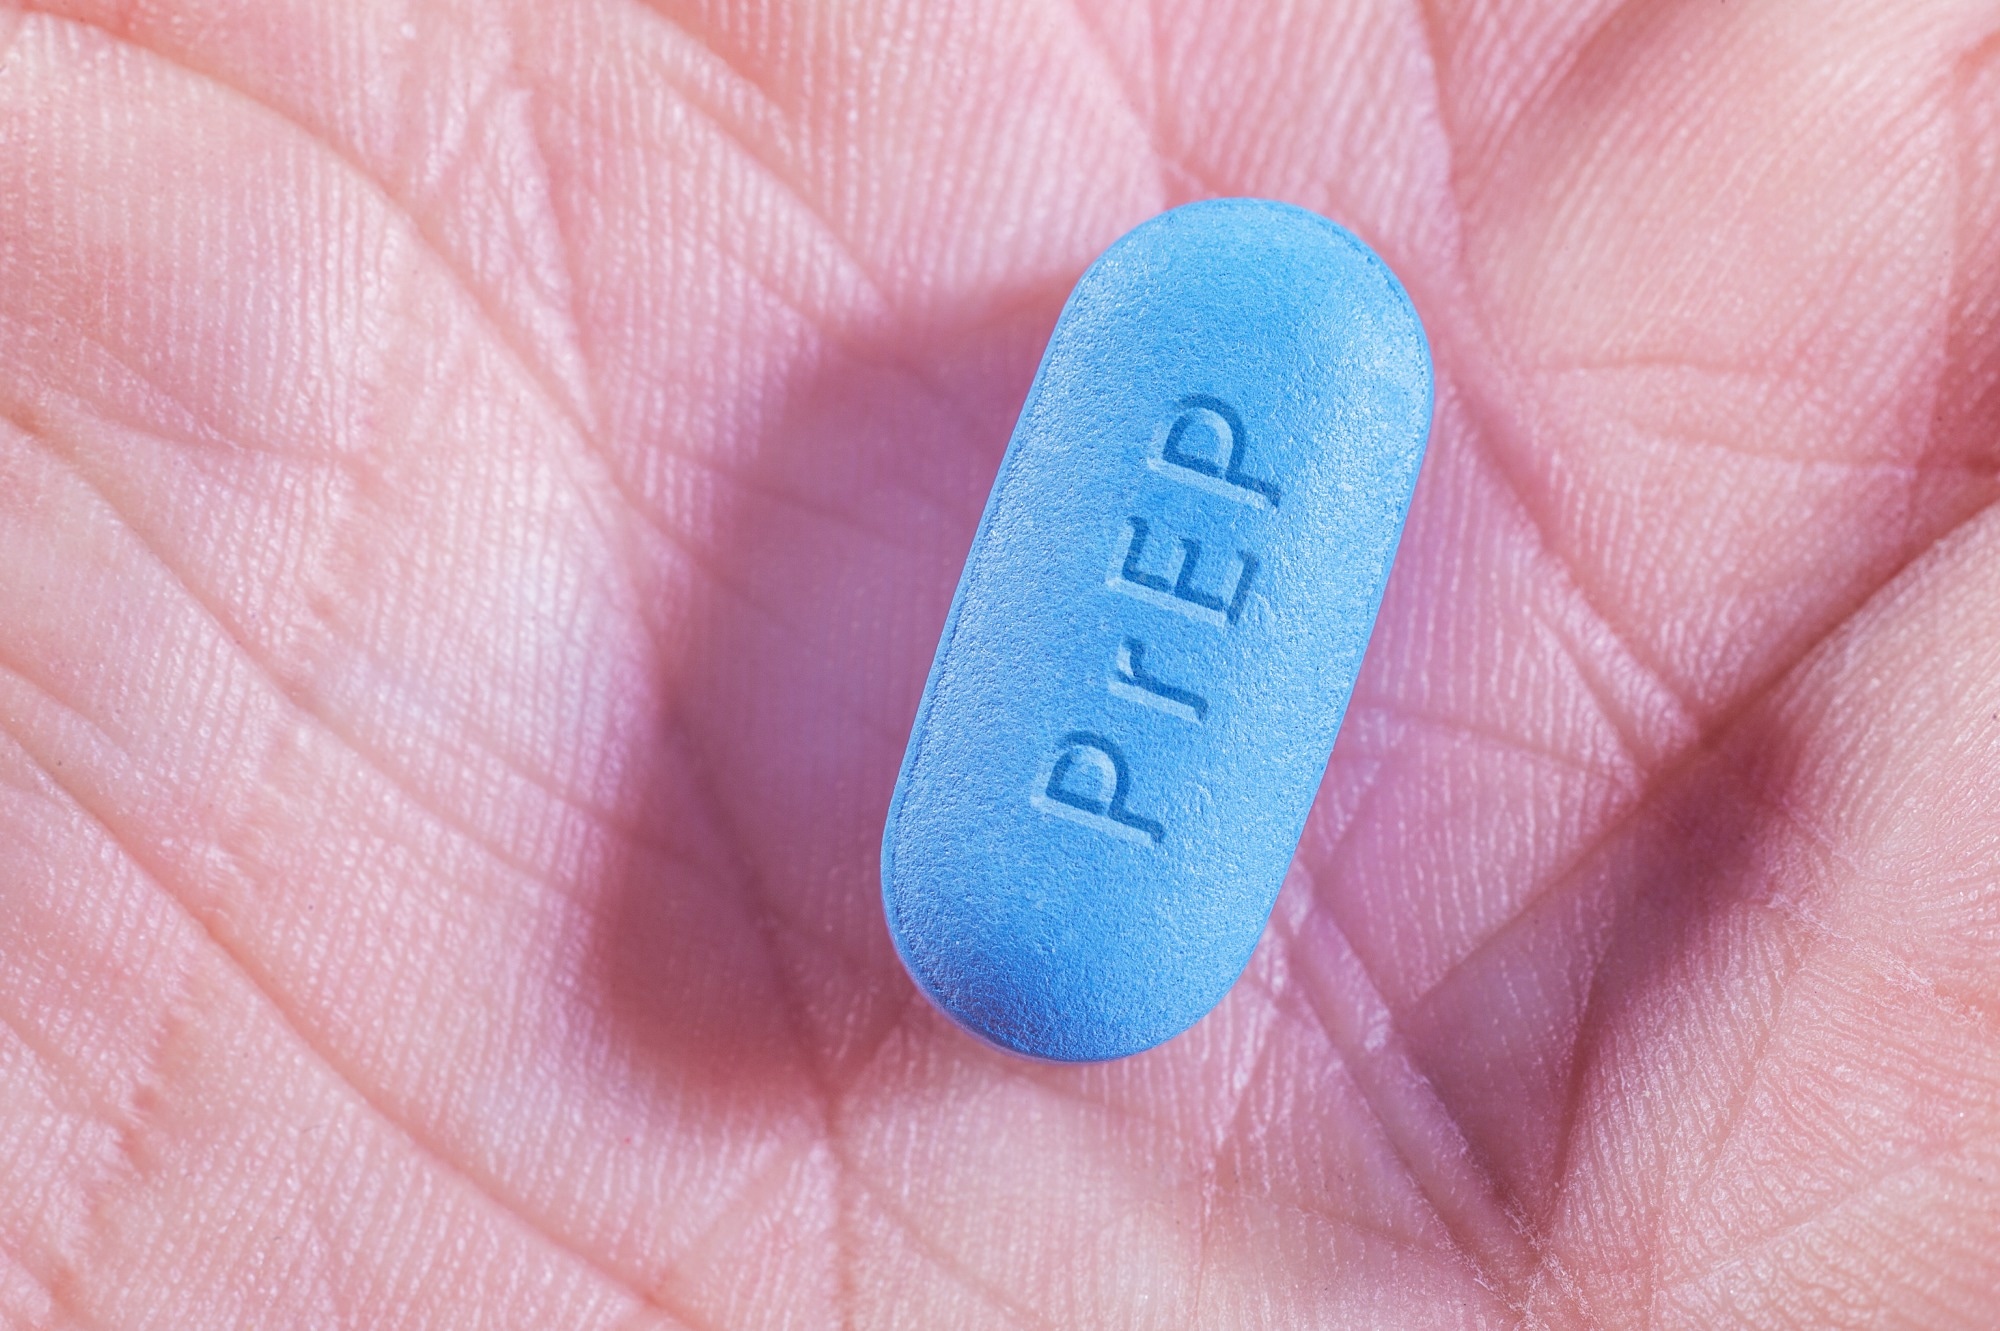 Study: HIV pre-exposure prophylaxis and its implementation in the PrEP Impact Trial in England: a pragmatic health technology assessment. Image Credit: Marc Bruxelle/Shutterstock.com